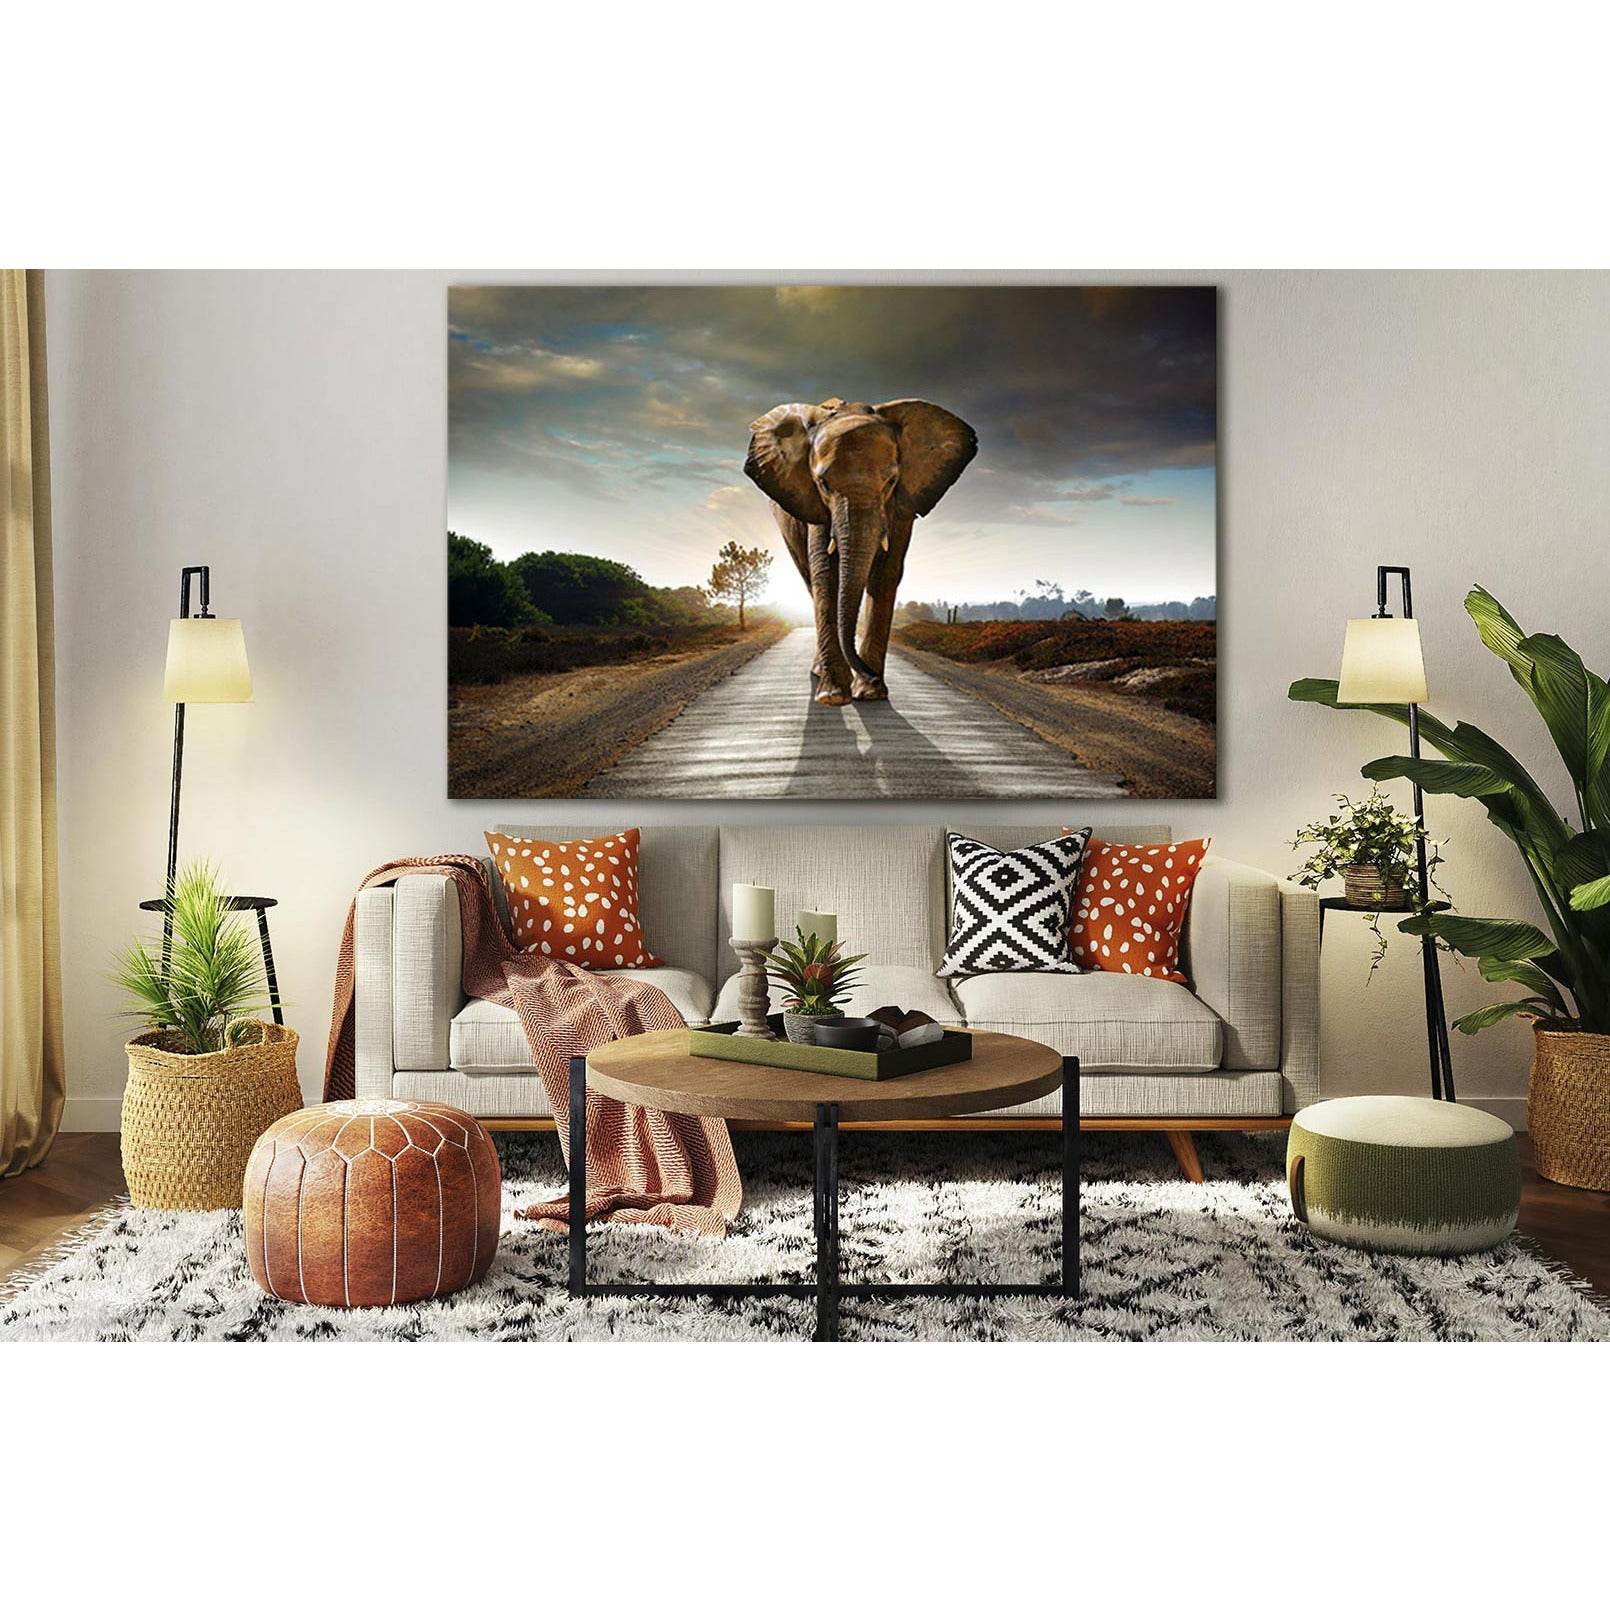 Elephant On The Road №SL1555 Ready to Hang Canvas Print